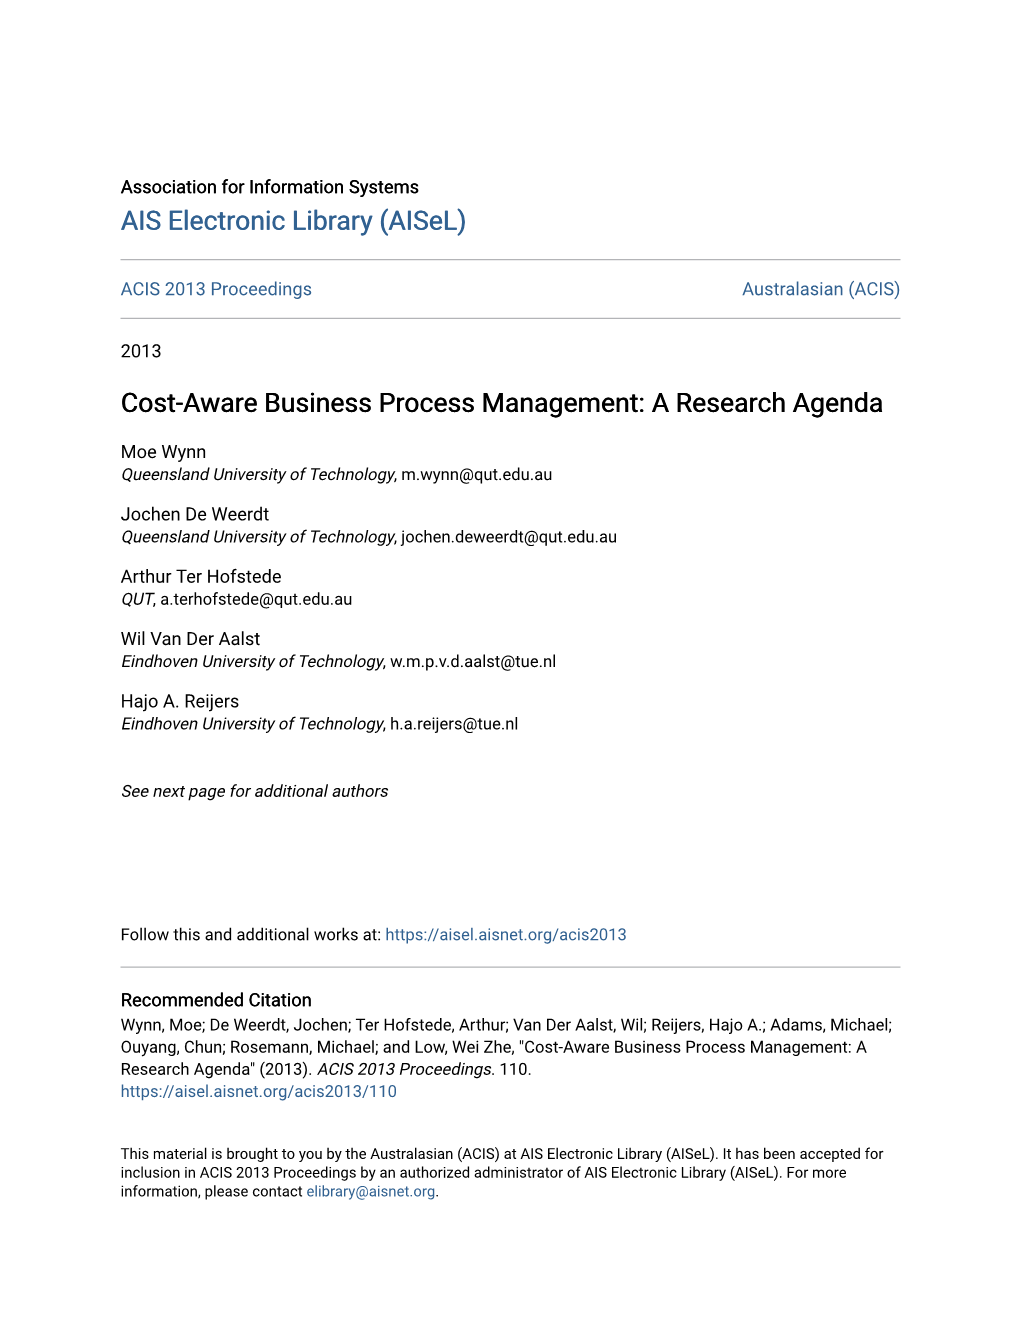 Cost-Aware Business Process Management: a Research Agenda